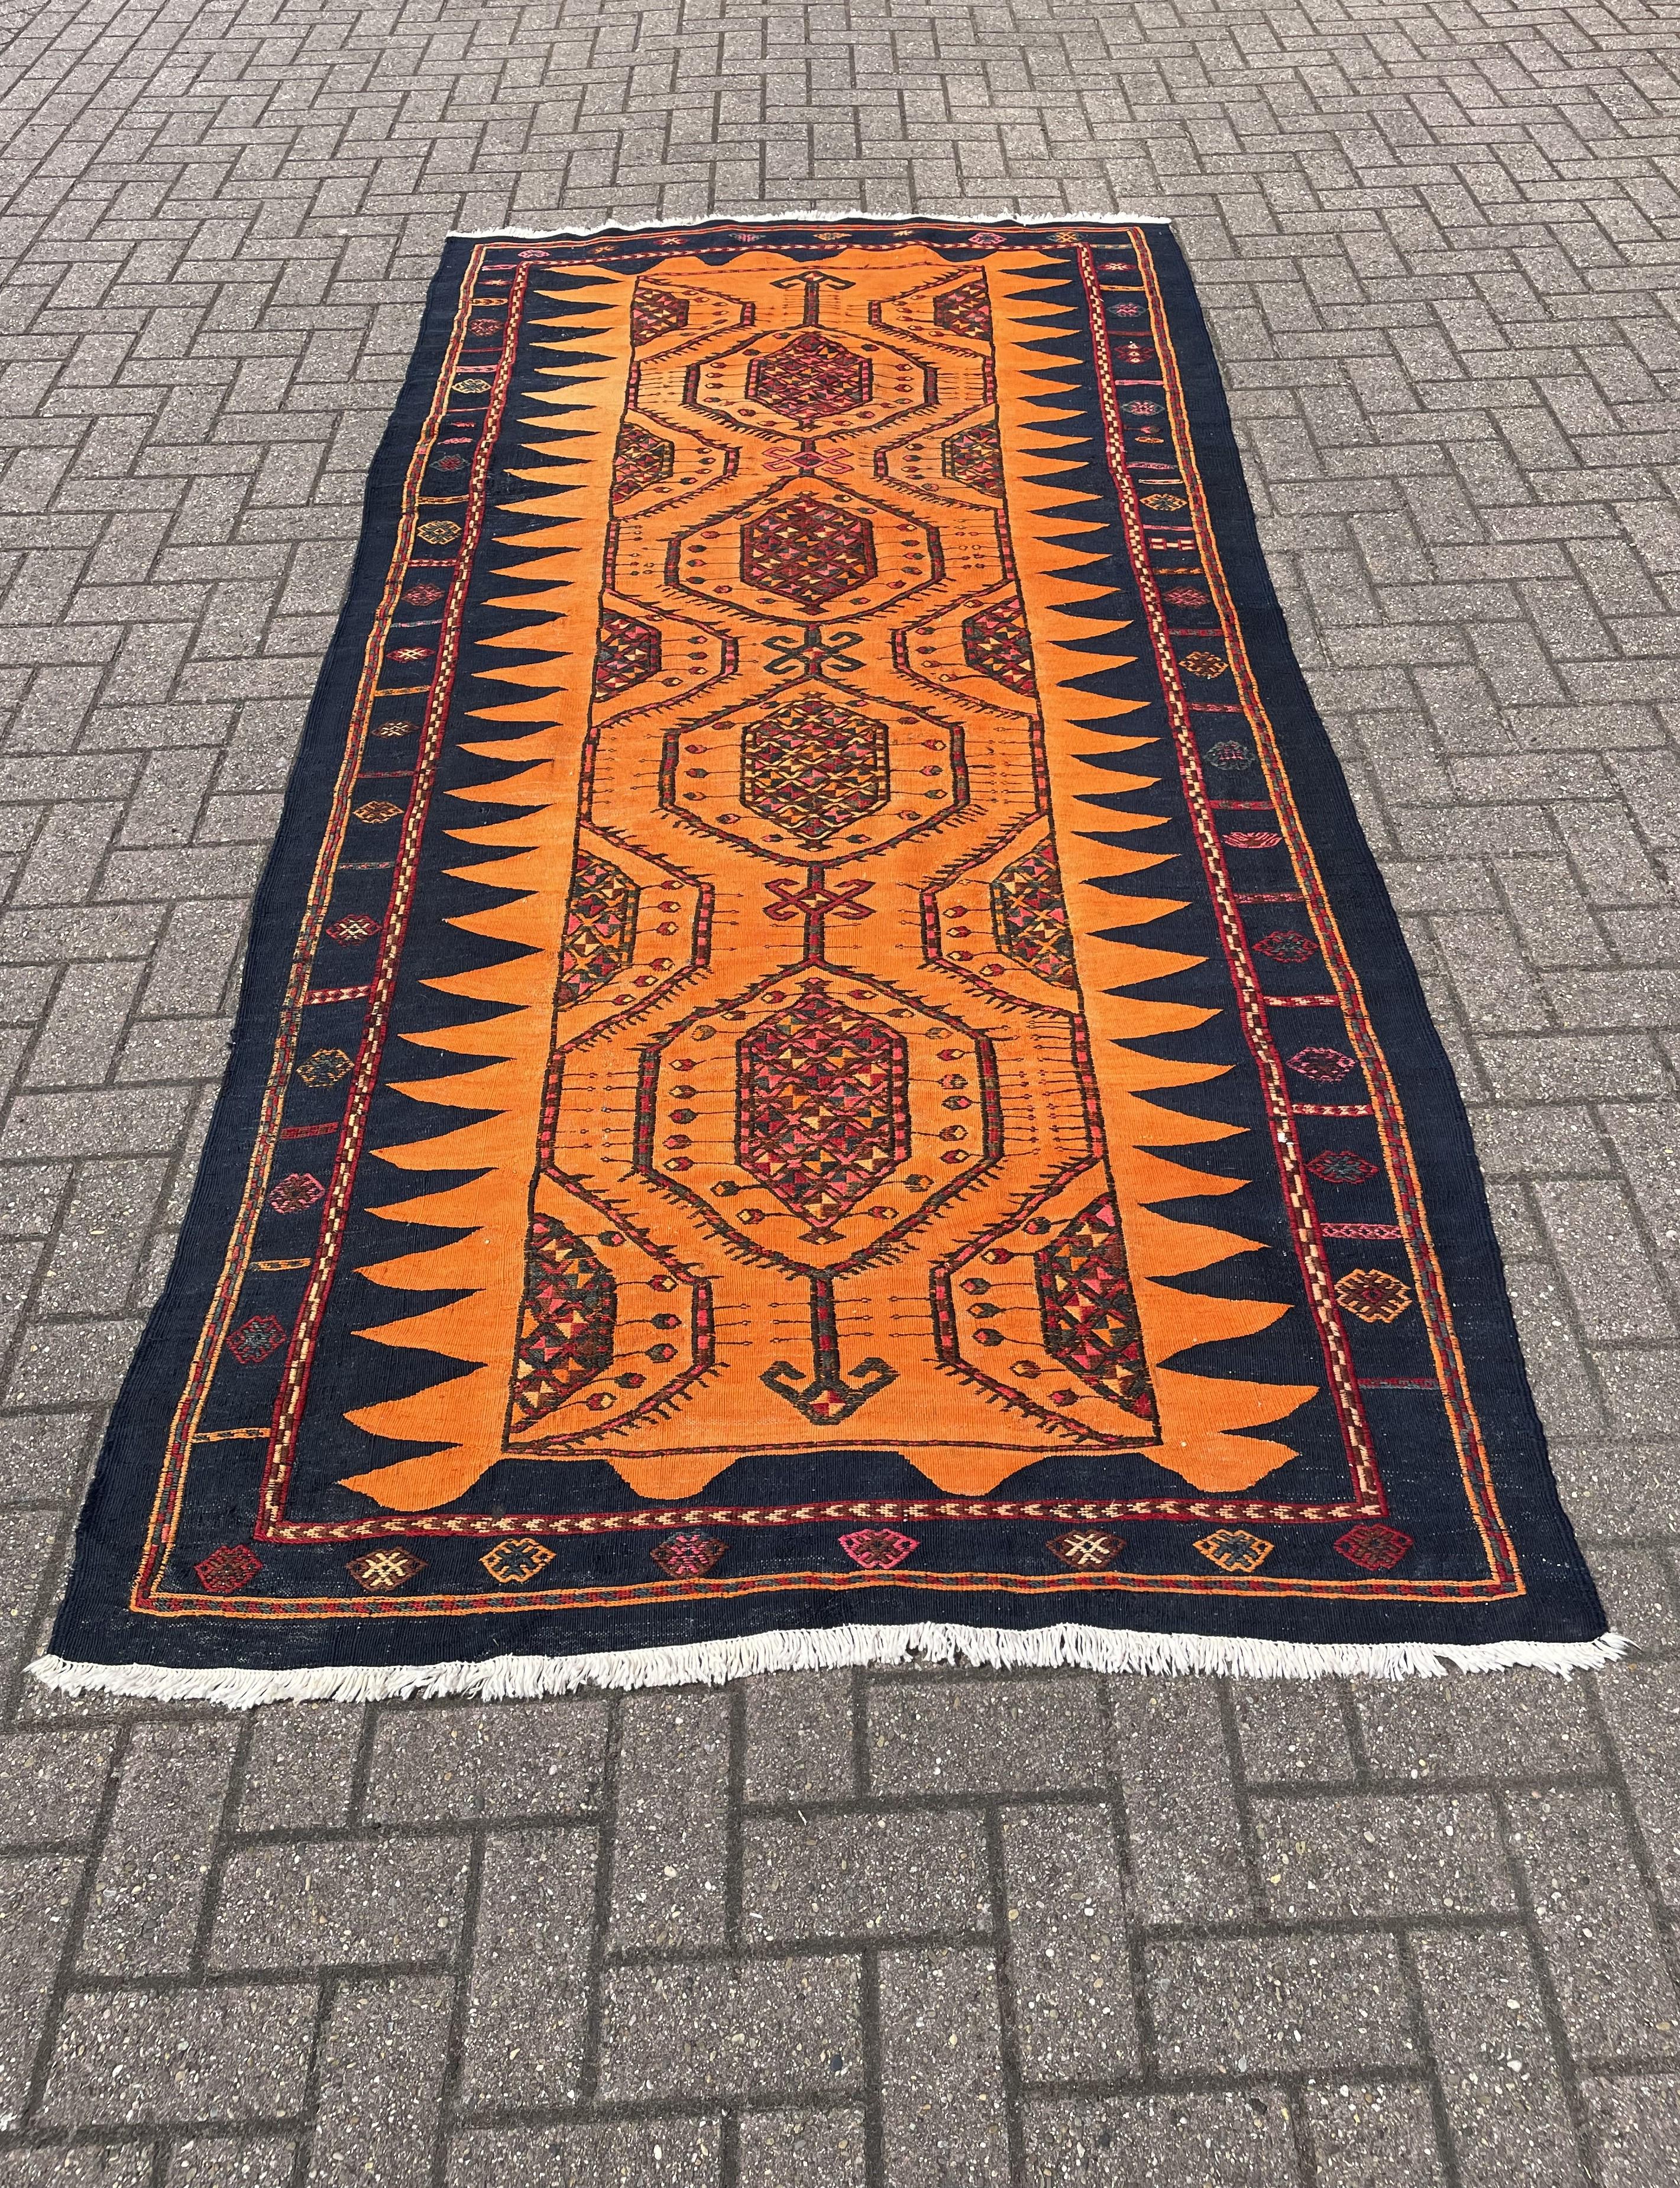 Stunning & Large Size Hand Knotted Kilim Rug Midcentury Design w. Vibrant Colors For Sale 3